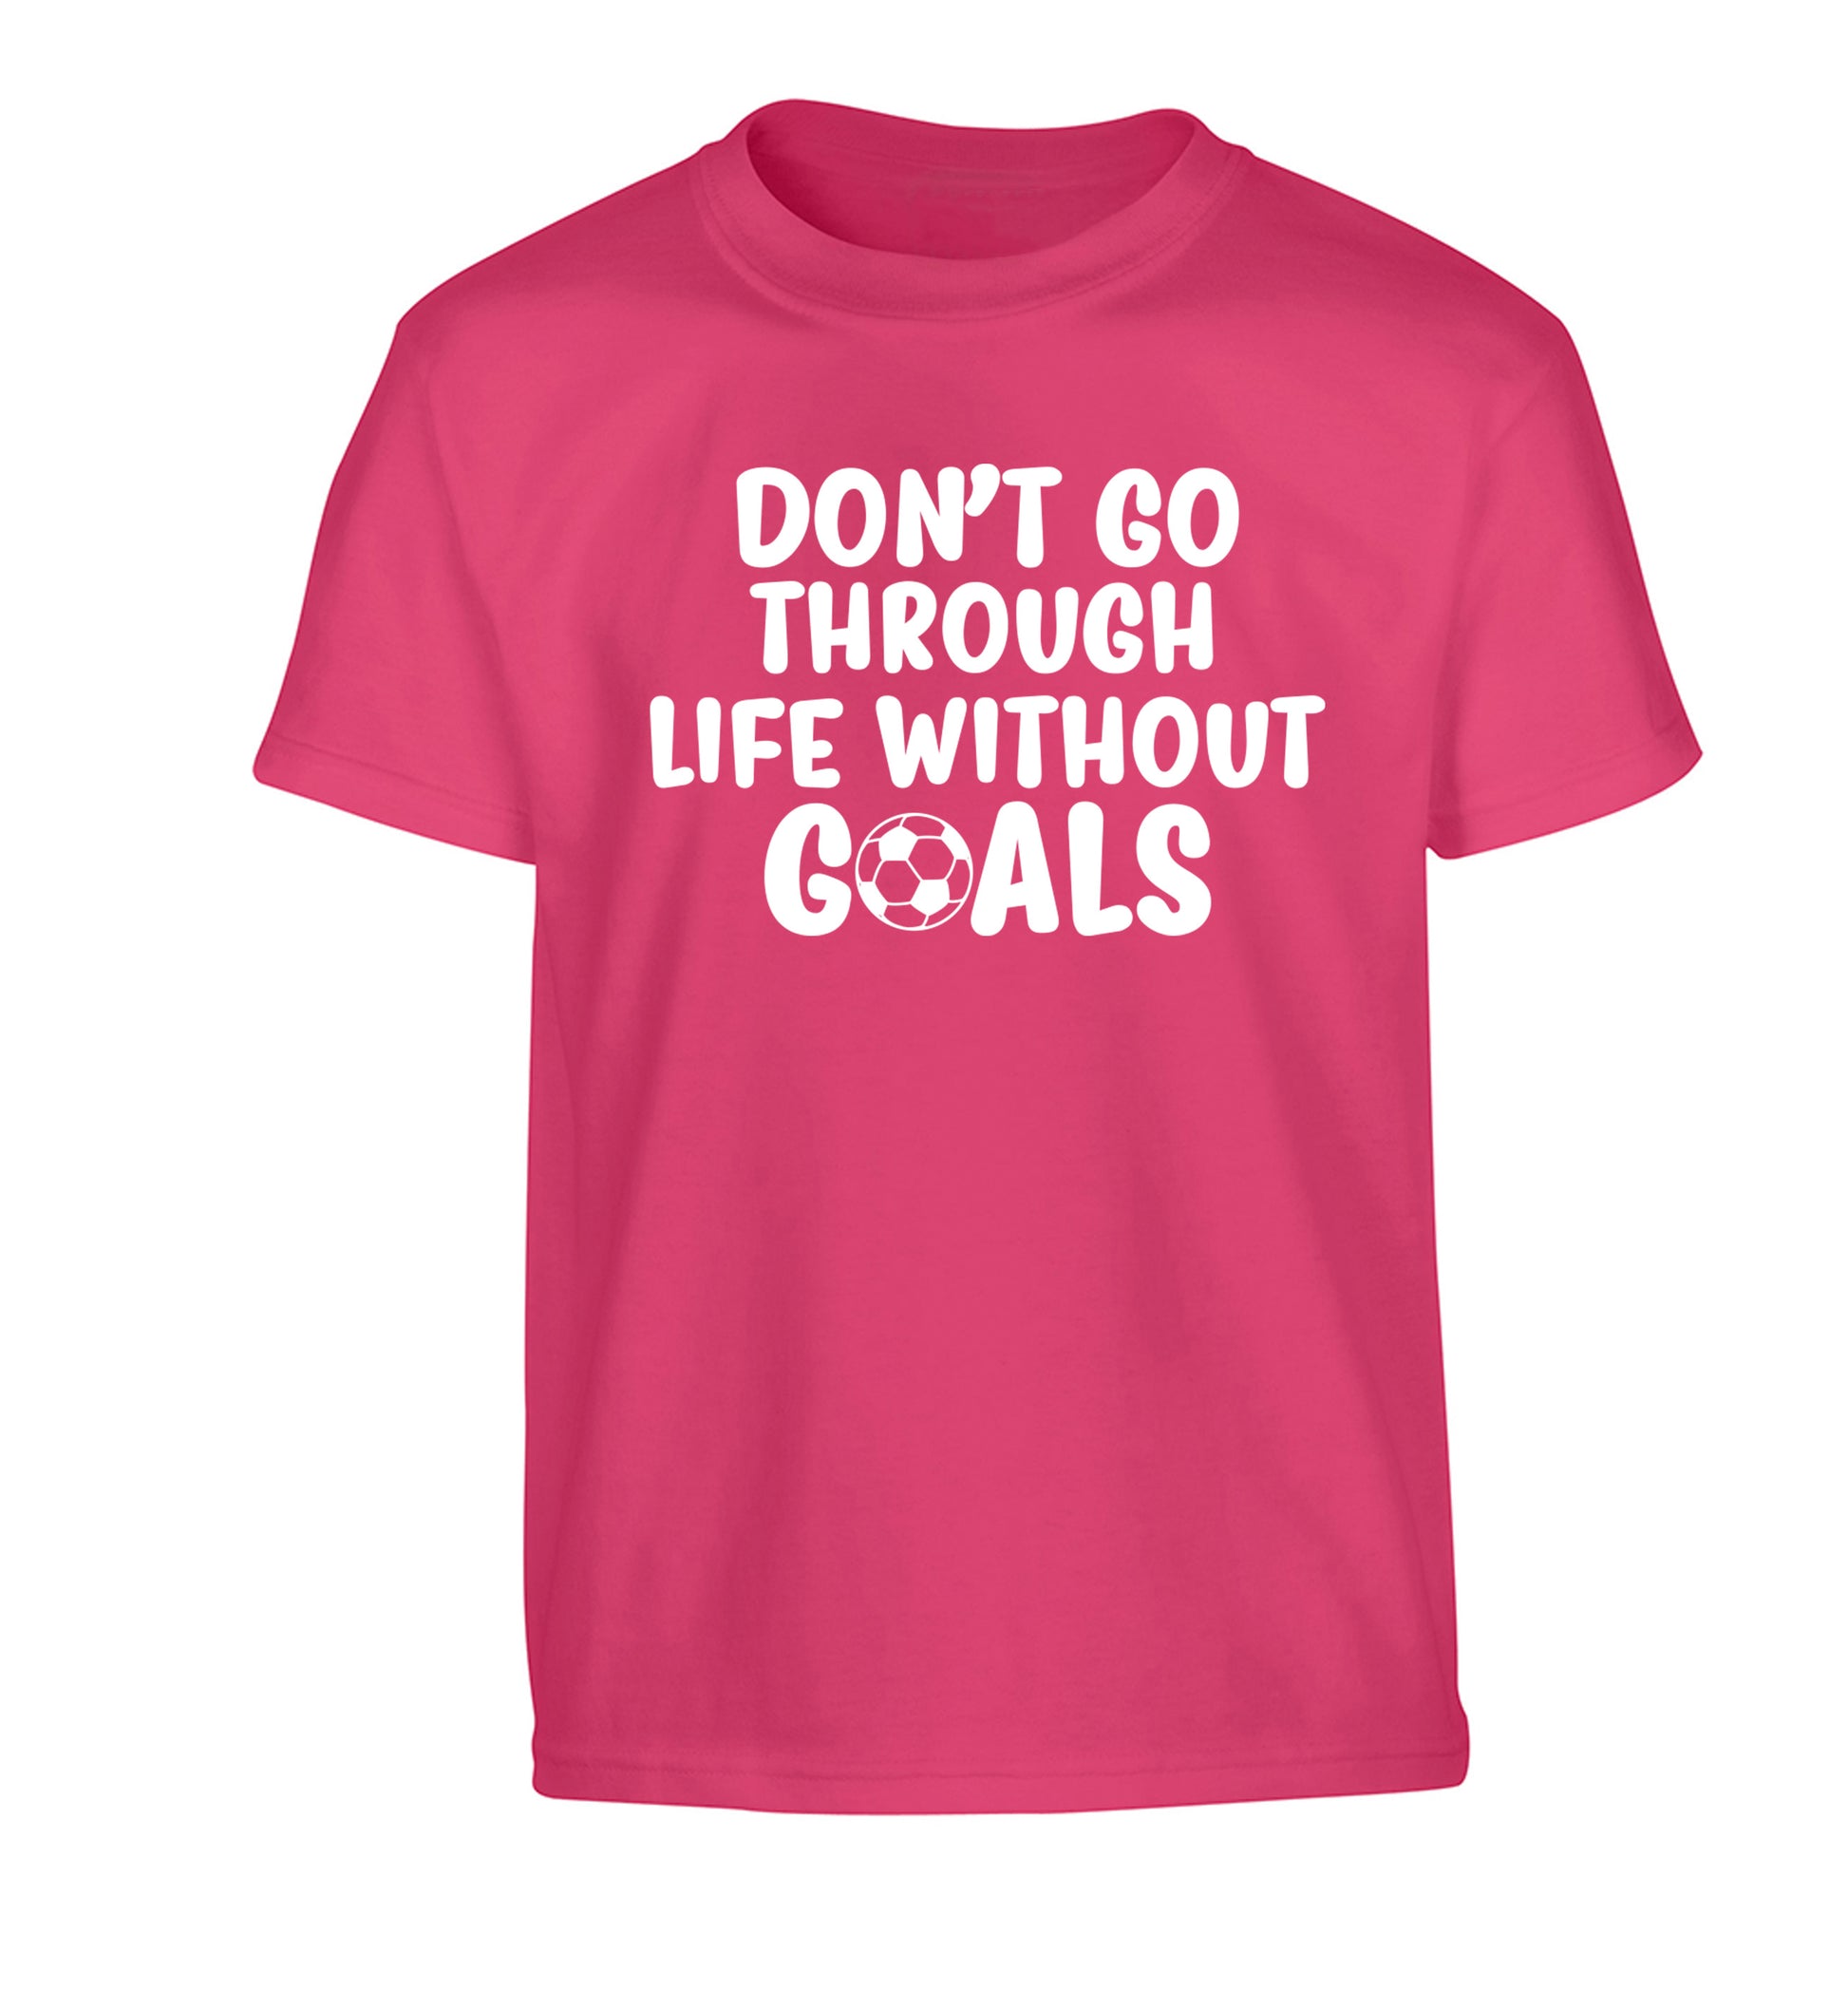 Don't go through life without goals Children's pink Tshirt 12-14 Years